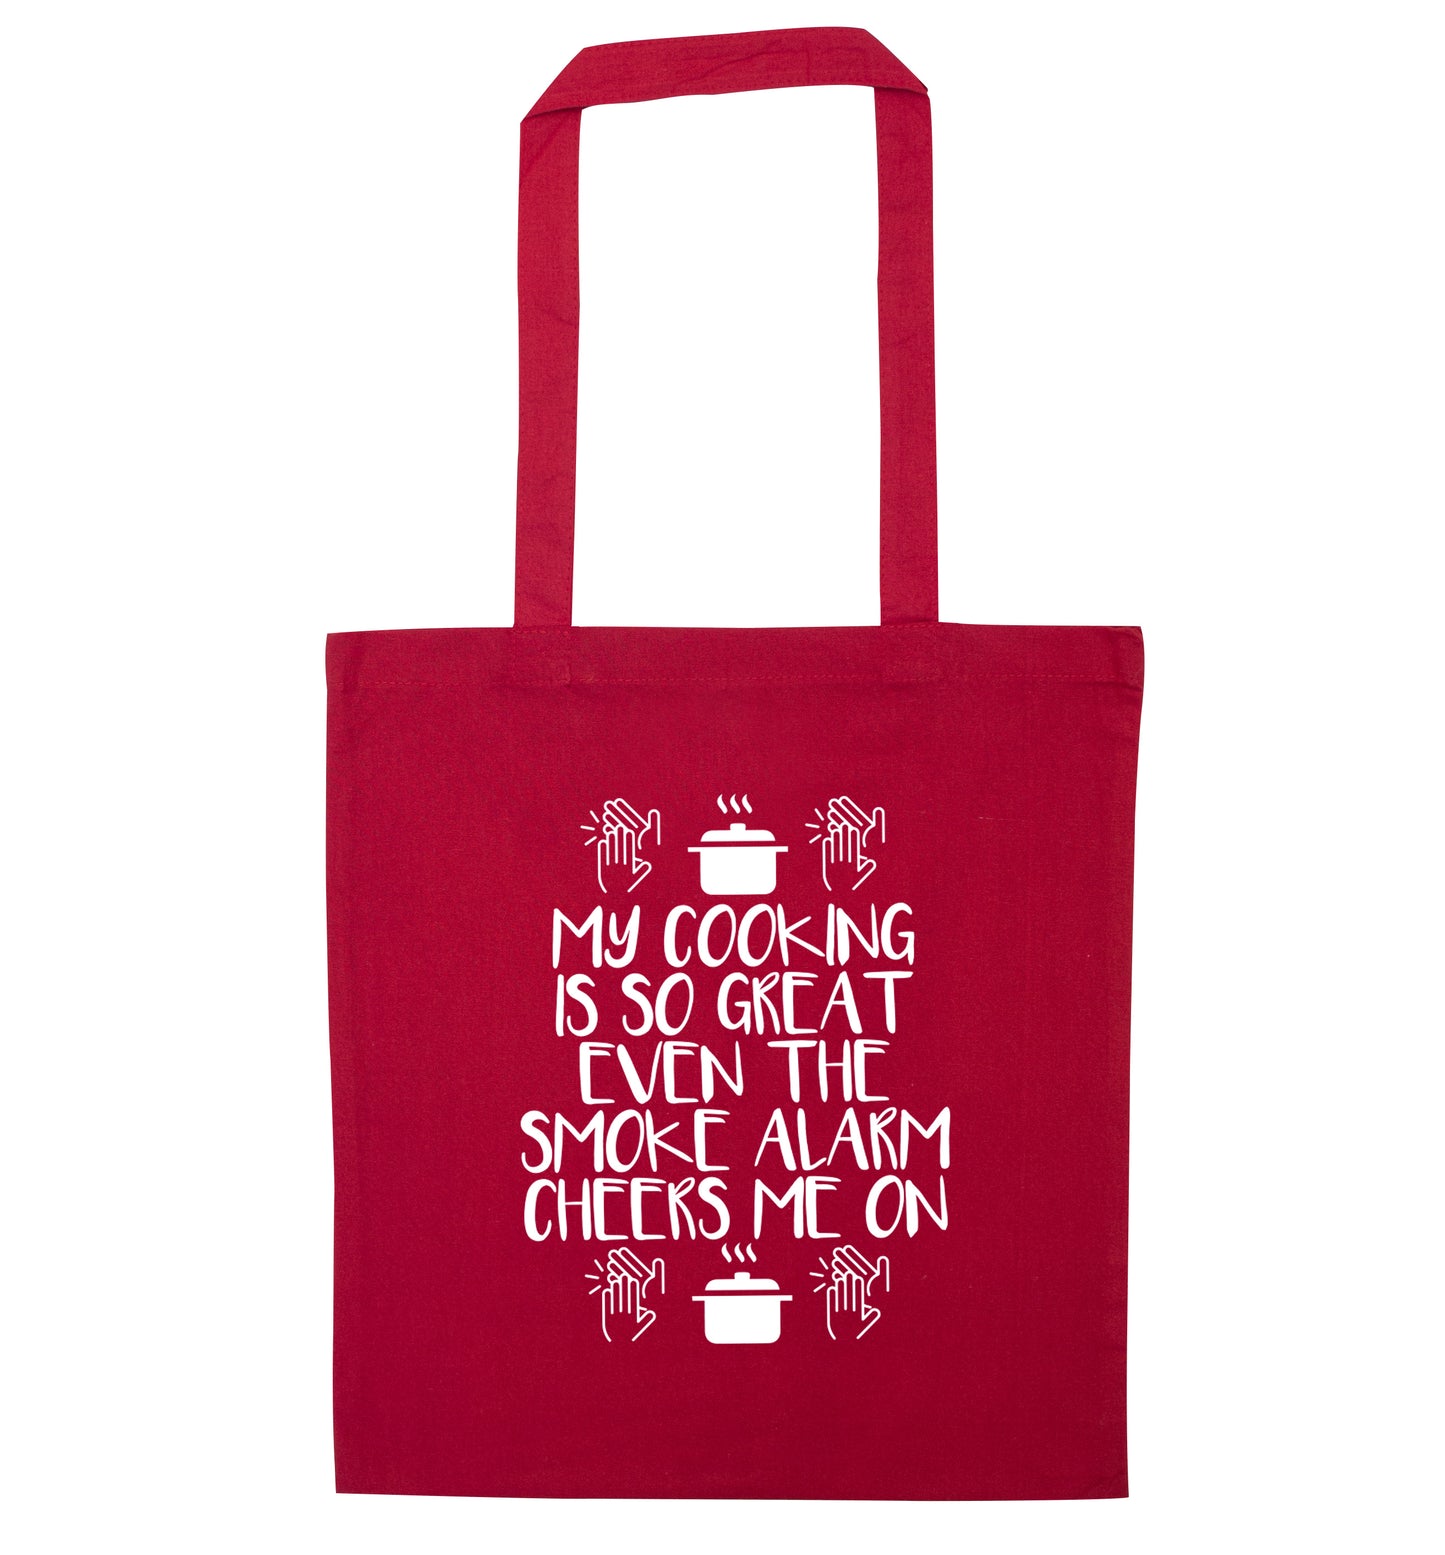 My cooking is so great even the smoke alarm cheers me on! red tote bag